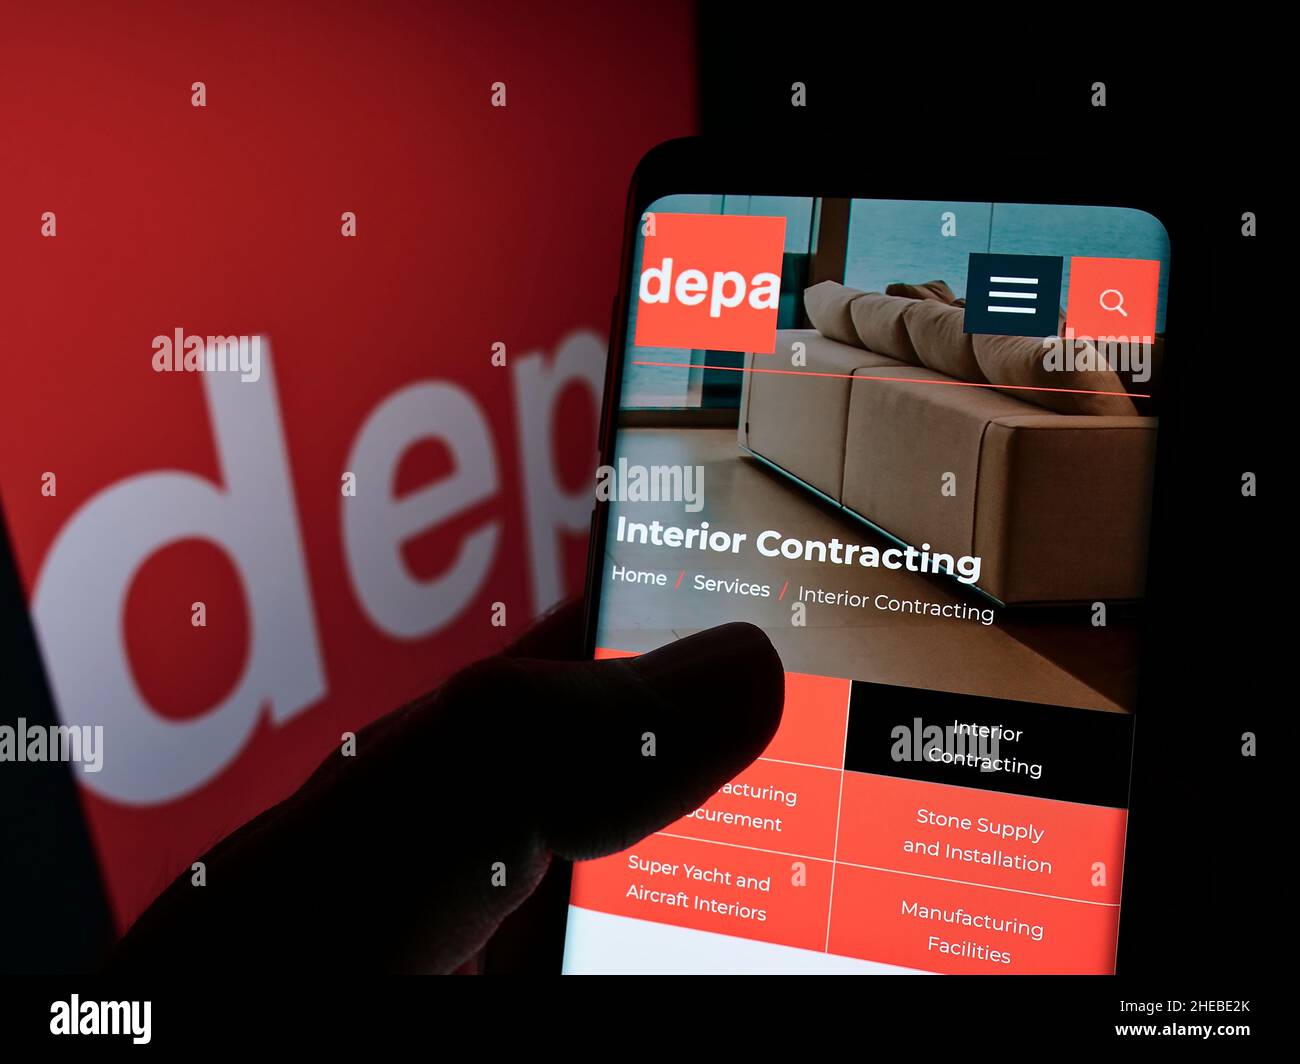 Person holding cellphone with webpage of interior construction company Depa Plc on screen in front of logo. Focus on center of phone display. Stock Photo